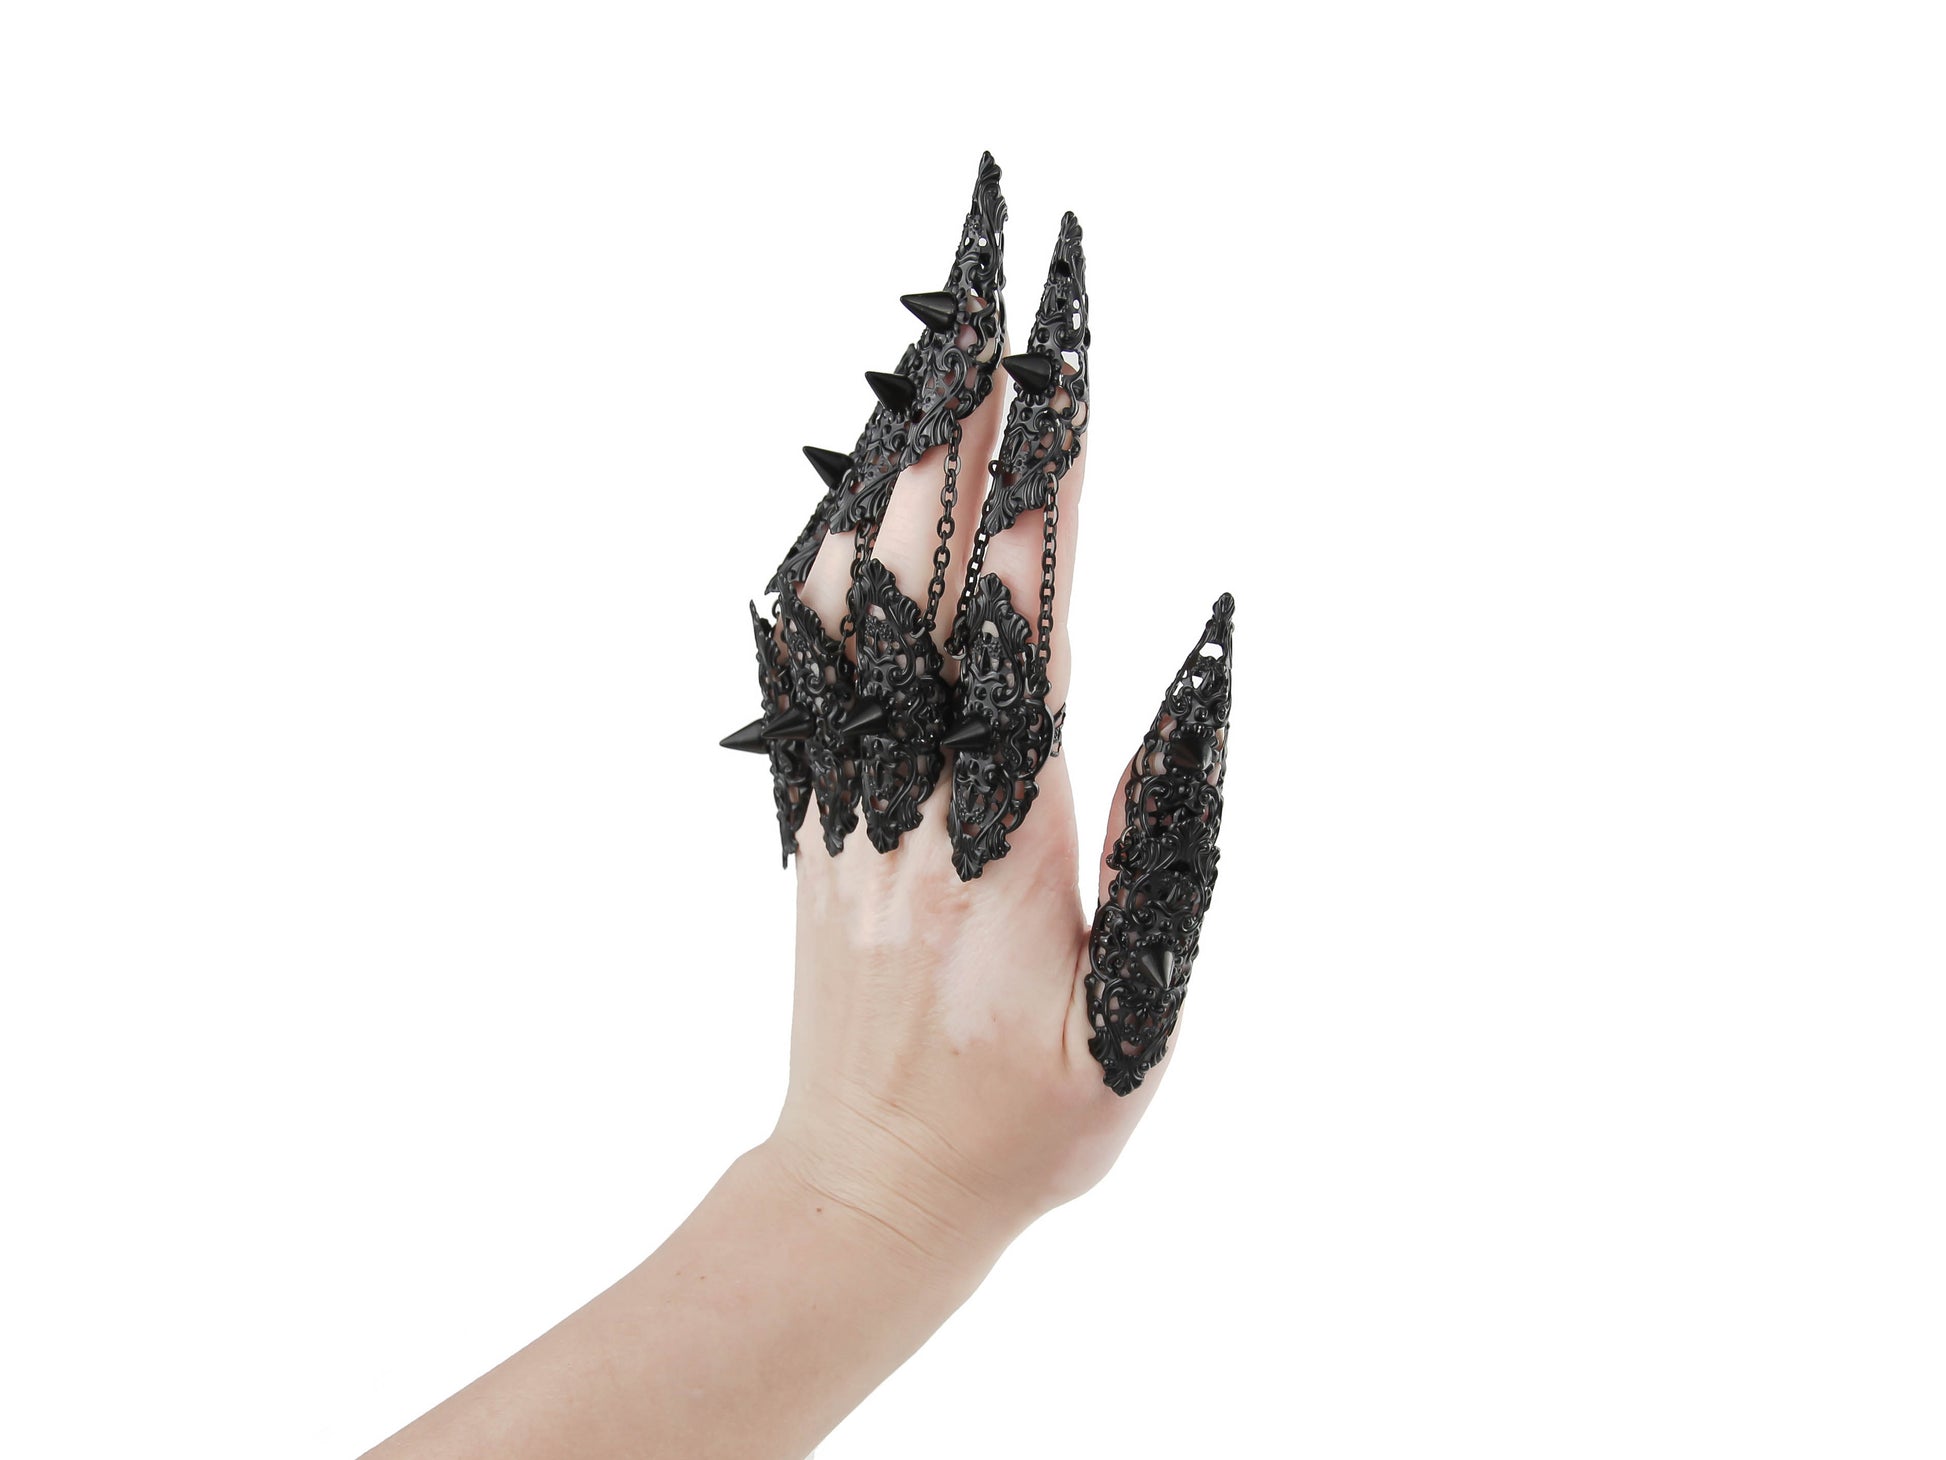 A hand is dramatically extended, displaying a full set of Myril Jewels studded nail claw rings in black. Each claw ring is elaborately designed with spikes and filigree, reflecting a dark-avantgarde and neo-goth aesthetic. These bold pieces are tailored for gothic, punk, and alternative style enthusiasts, perfect for Halloween, and suitable as an expressive accessory for everyday wear. They embody the gothic-chic look, enhancing whimsigoth and witchcore outfits, and making a statement at rave parties